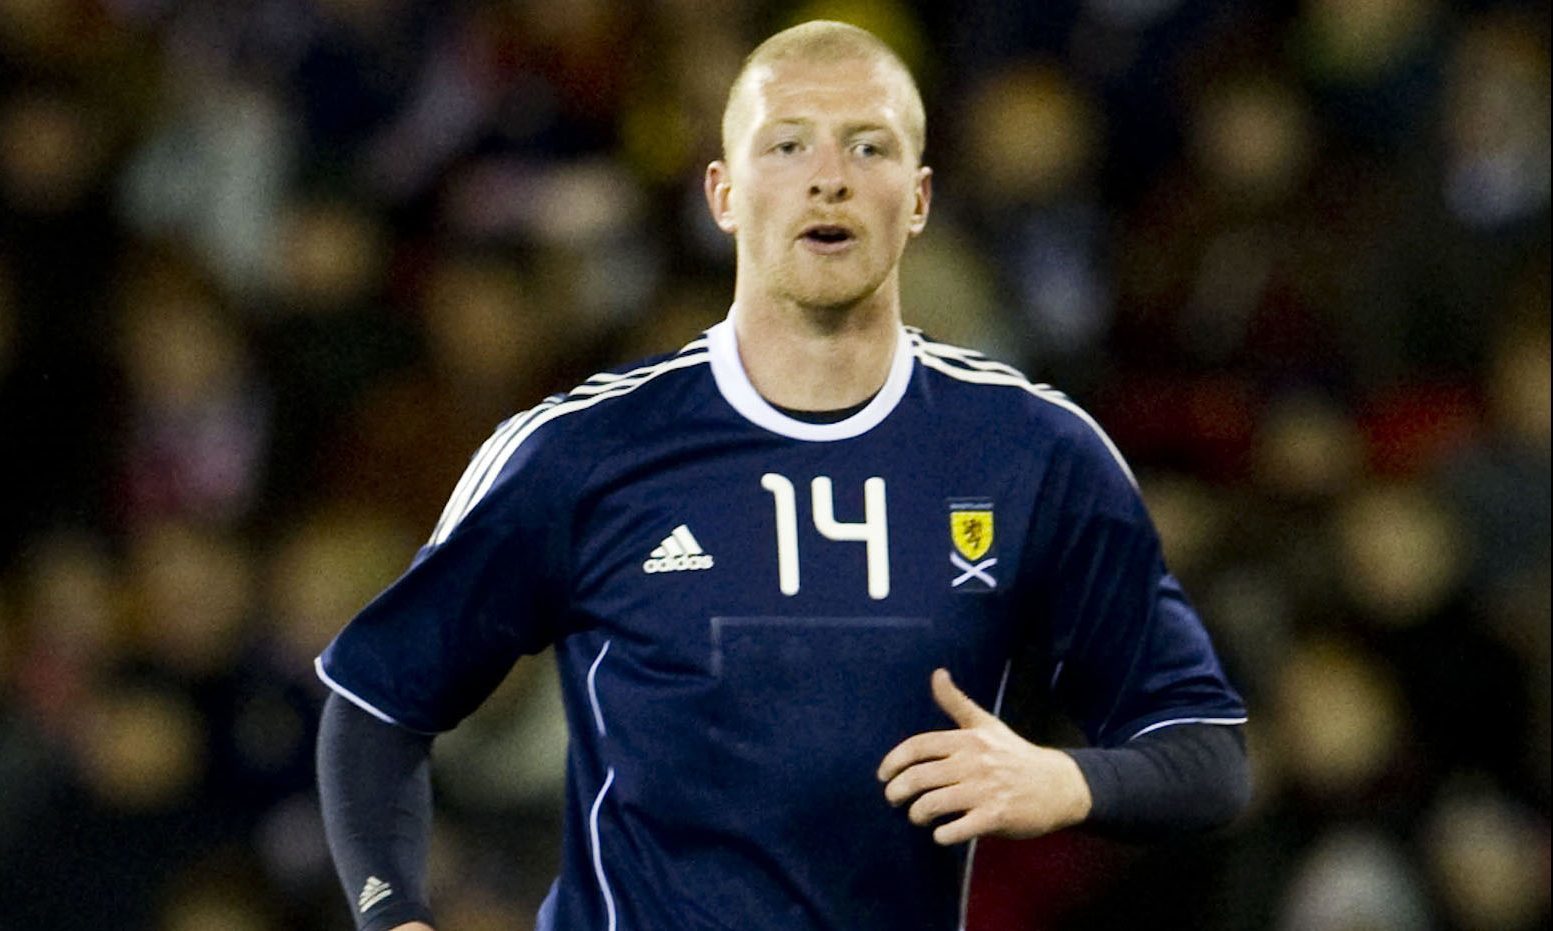 Garry Kenneth in action for Scotland in an international challenge match against the Faroe Islands in 2010.